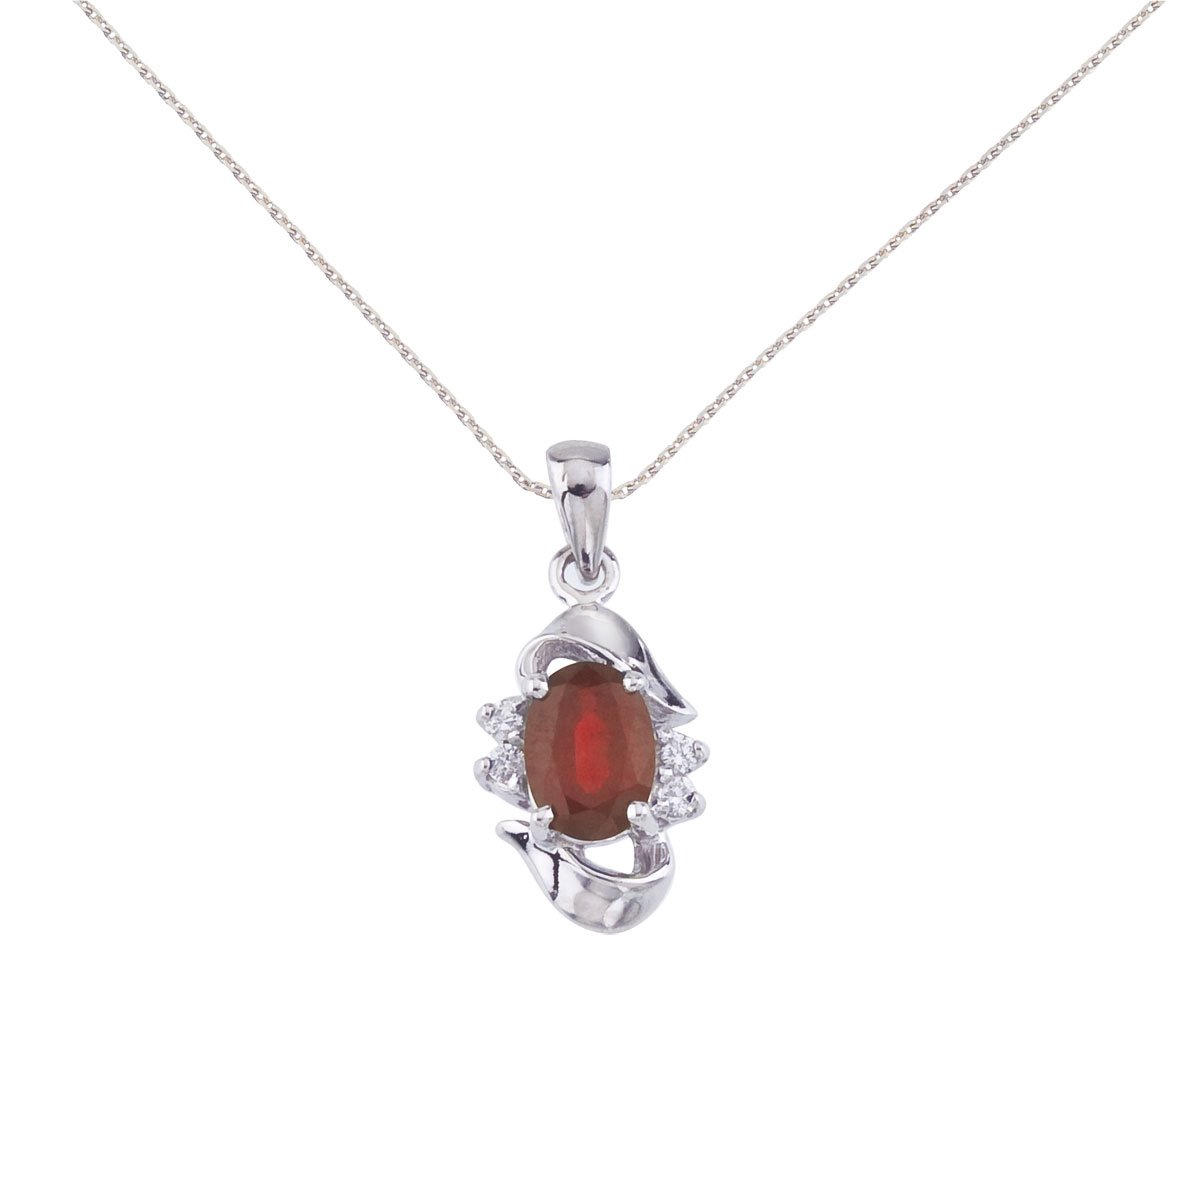 Add a hint of red to your look with this 14k white gold rbuy pendant. Featuring a genuine 7x5 mm ...